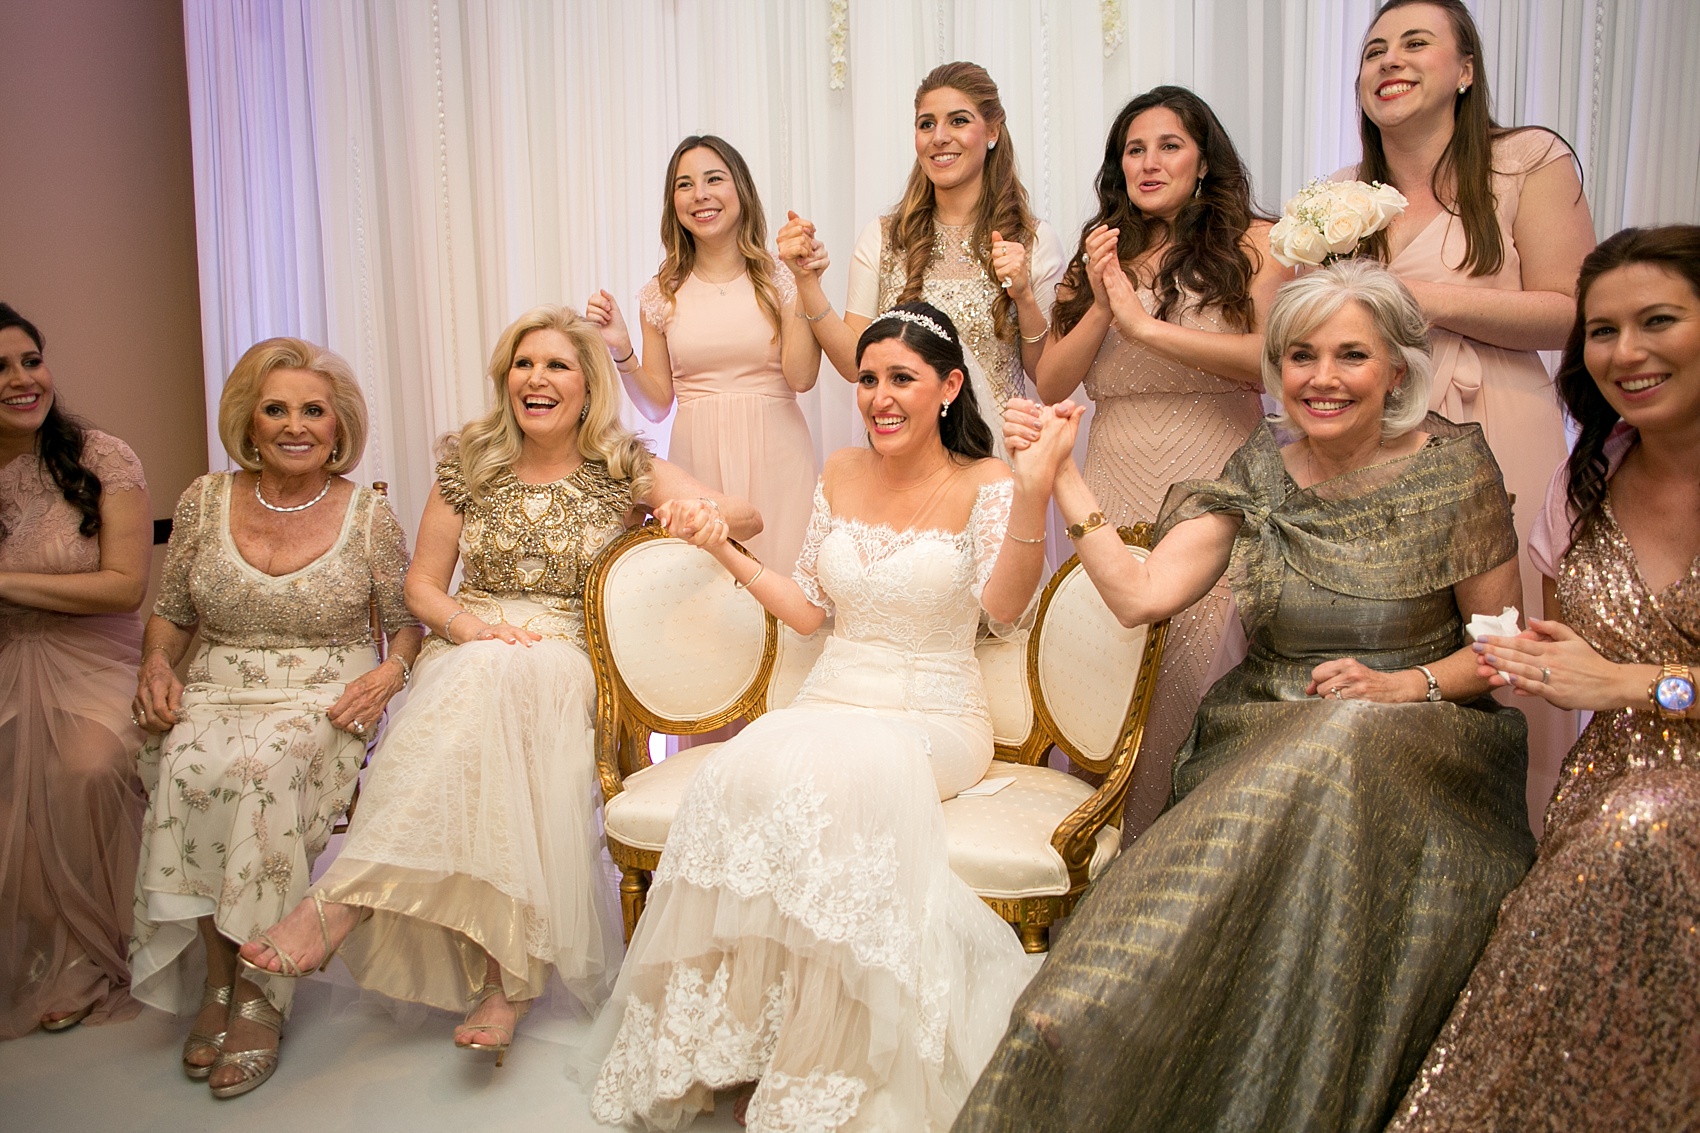 Mikkel Paige Photography photo of the bride and her bridesmaids at her bedekan at a Jewish religion ceremony at Temple Emanu-El in Closter, NJ.